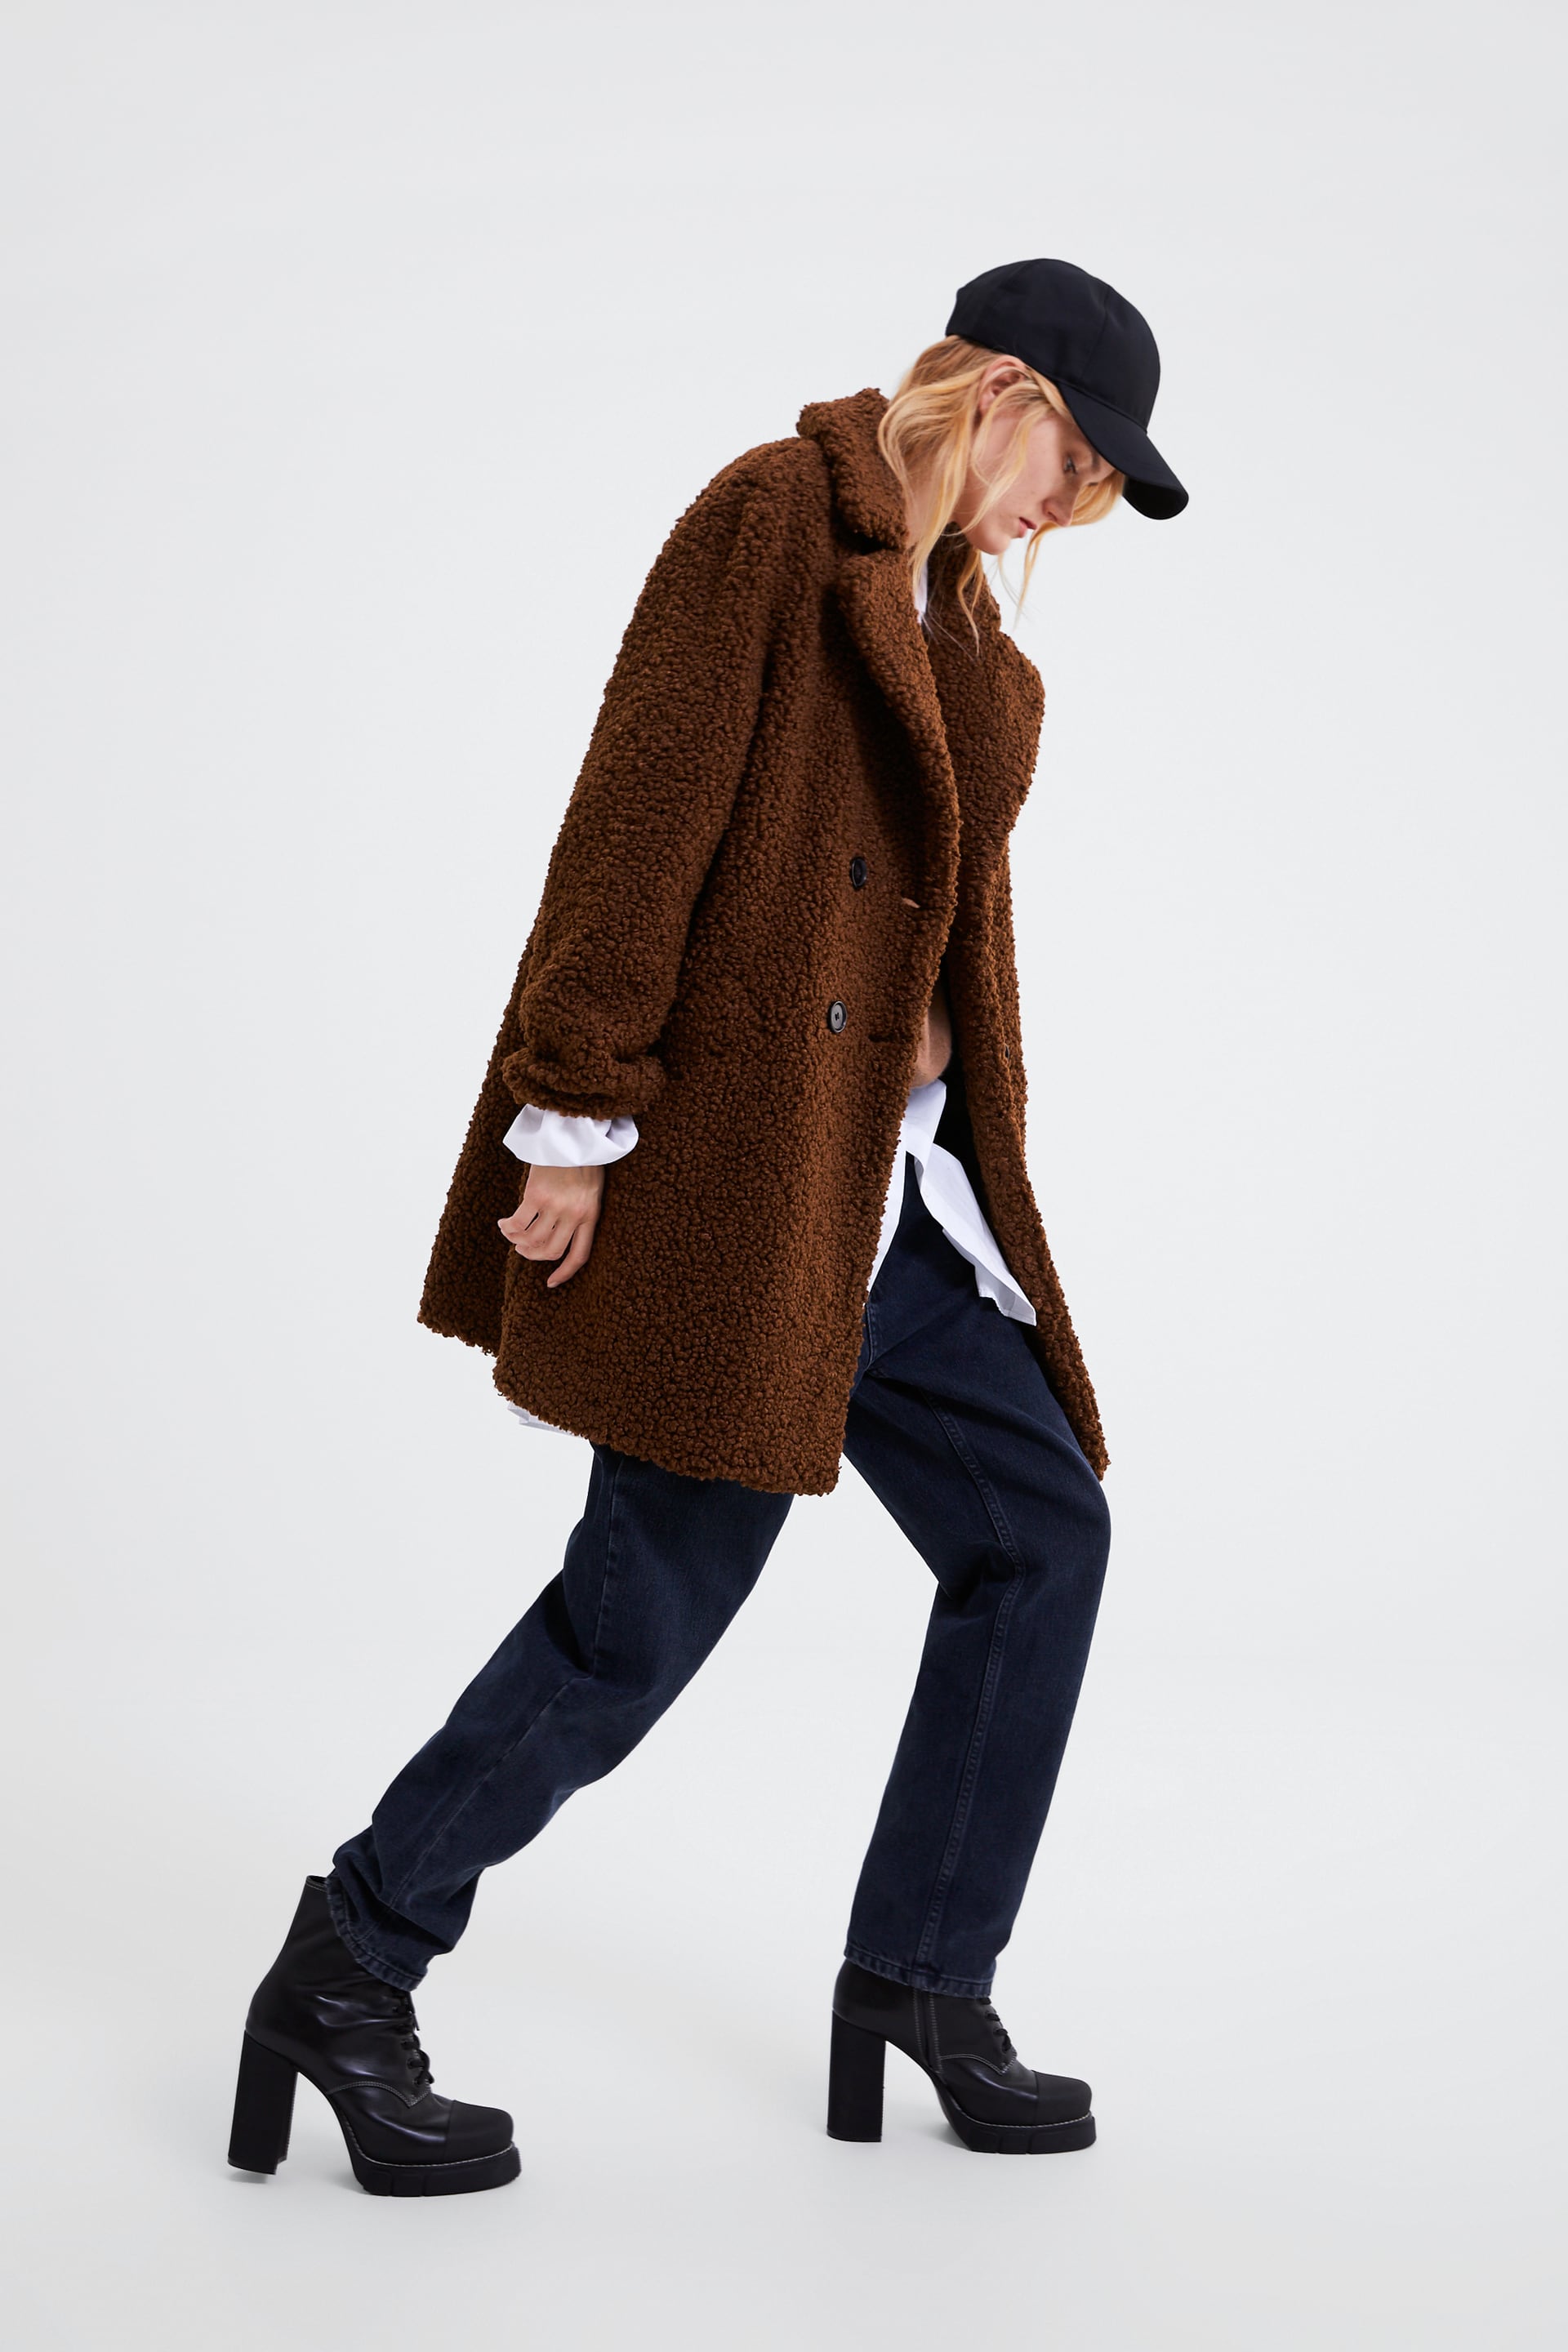 The Coat You Still Need this Winter on apartment 34